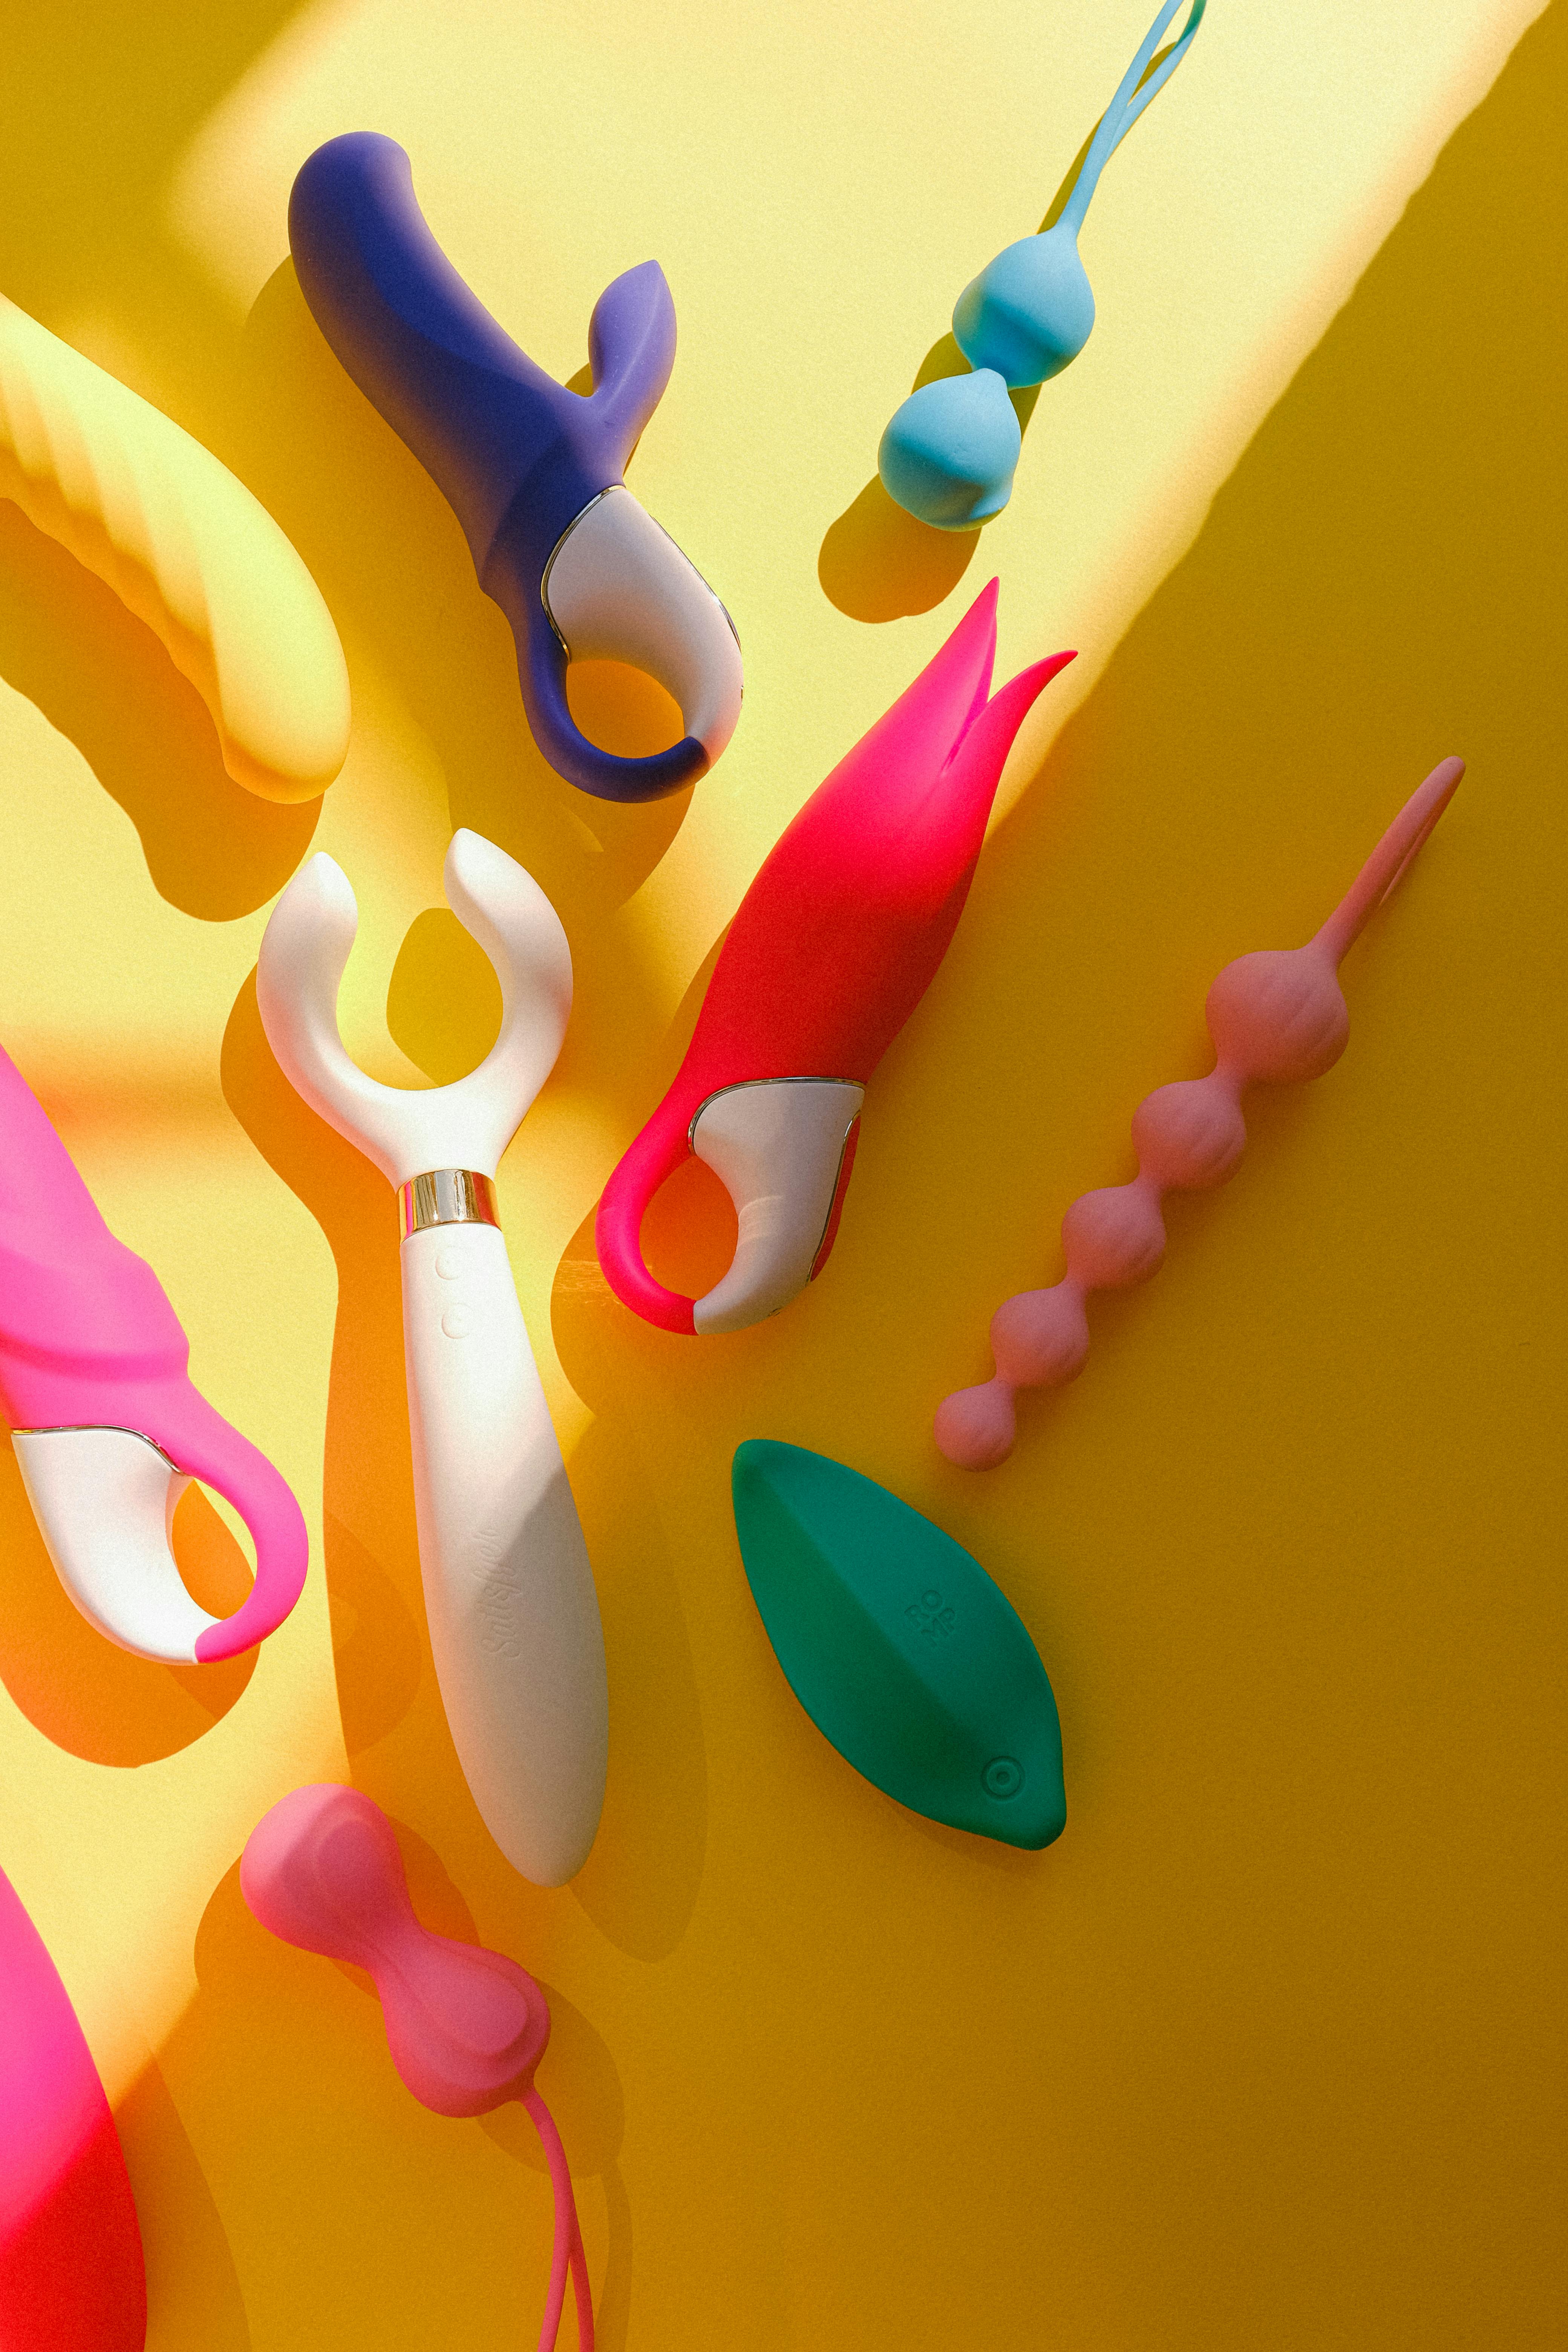 Sex Toys on a Yellow Background · Free Stock Photo